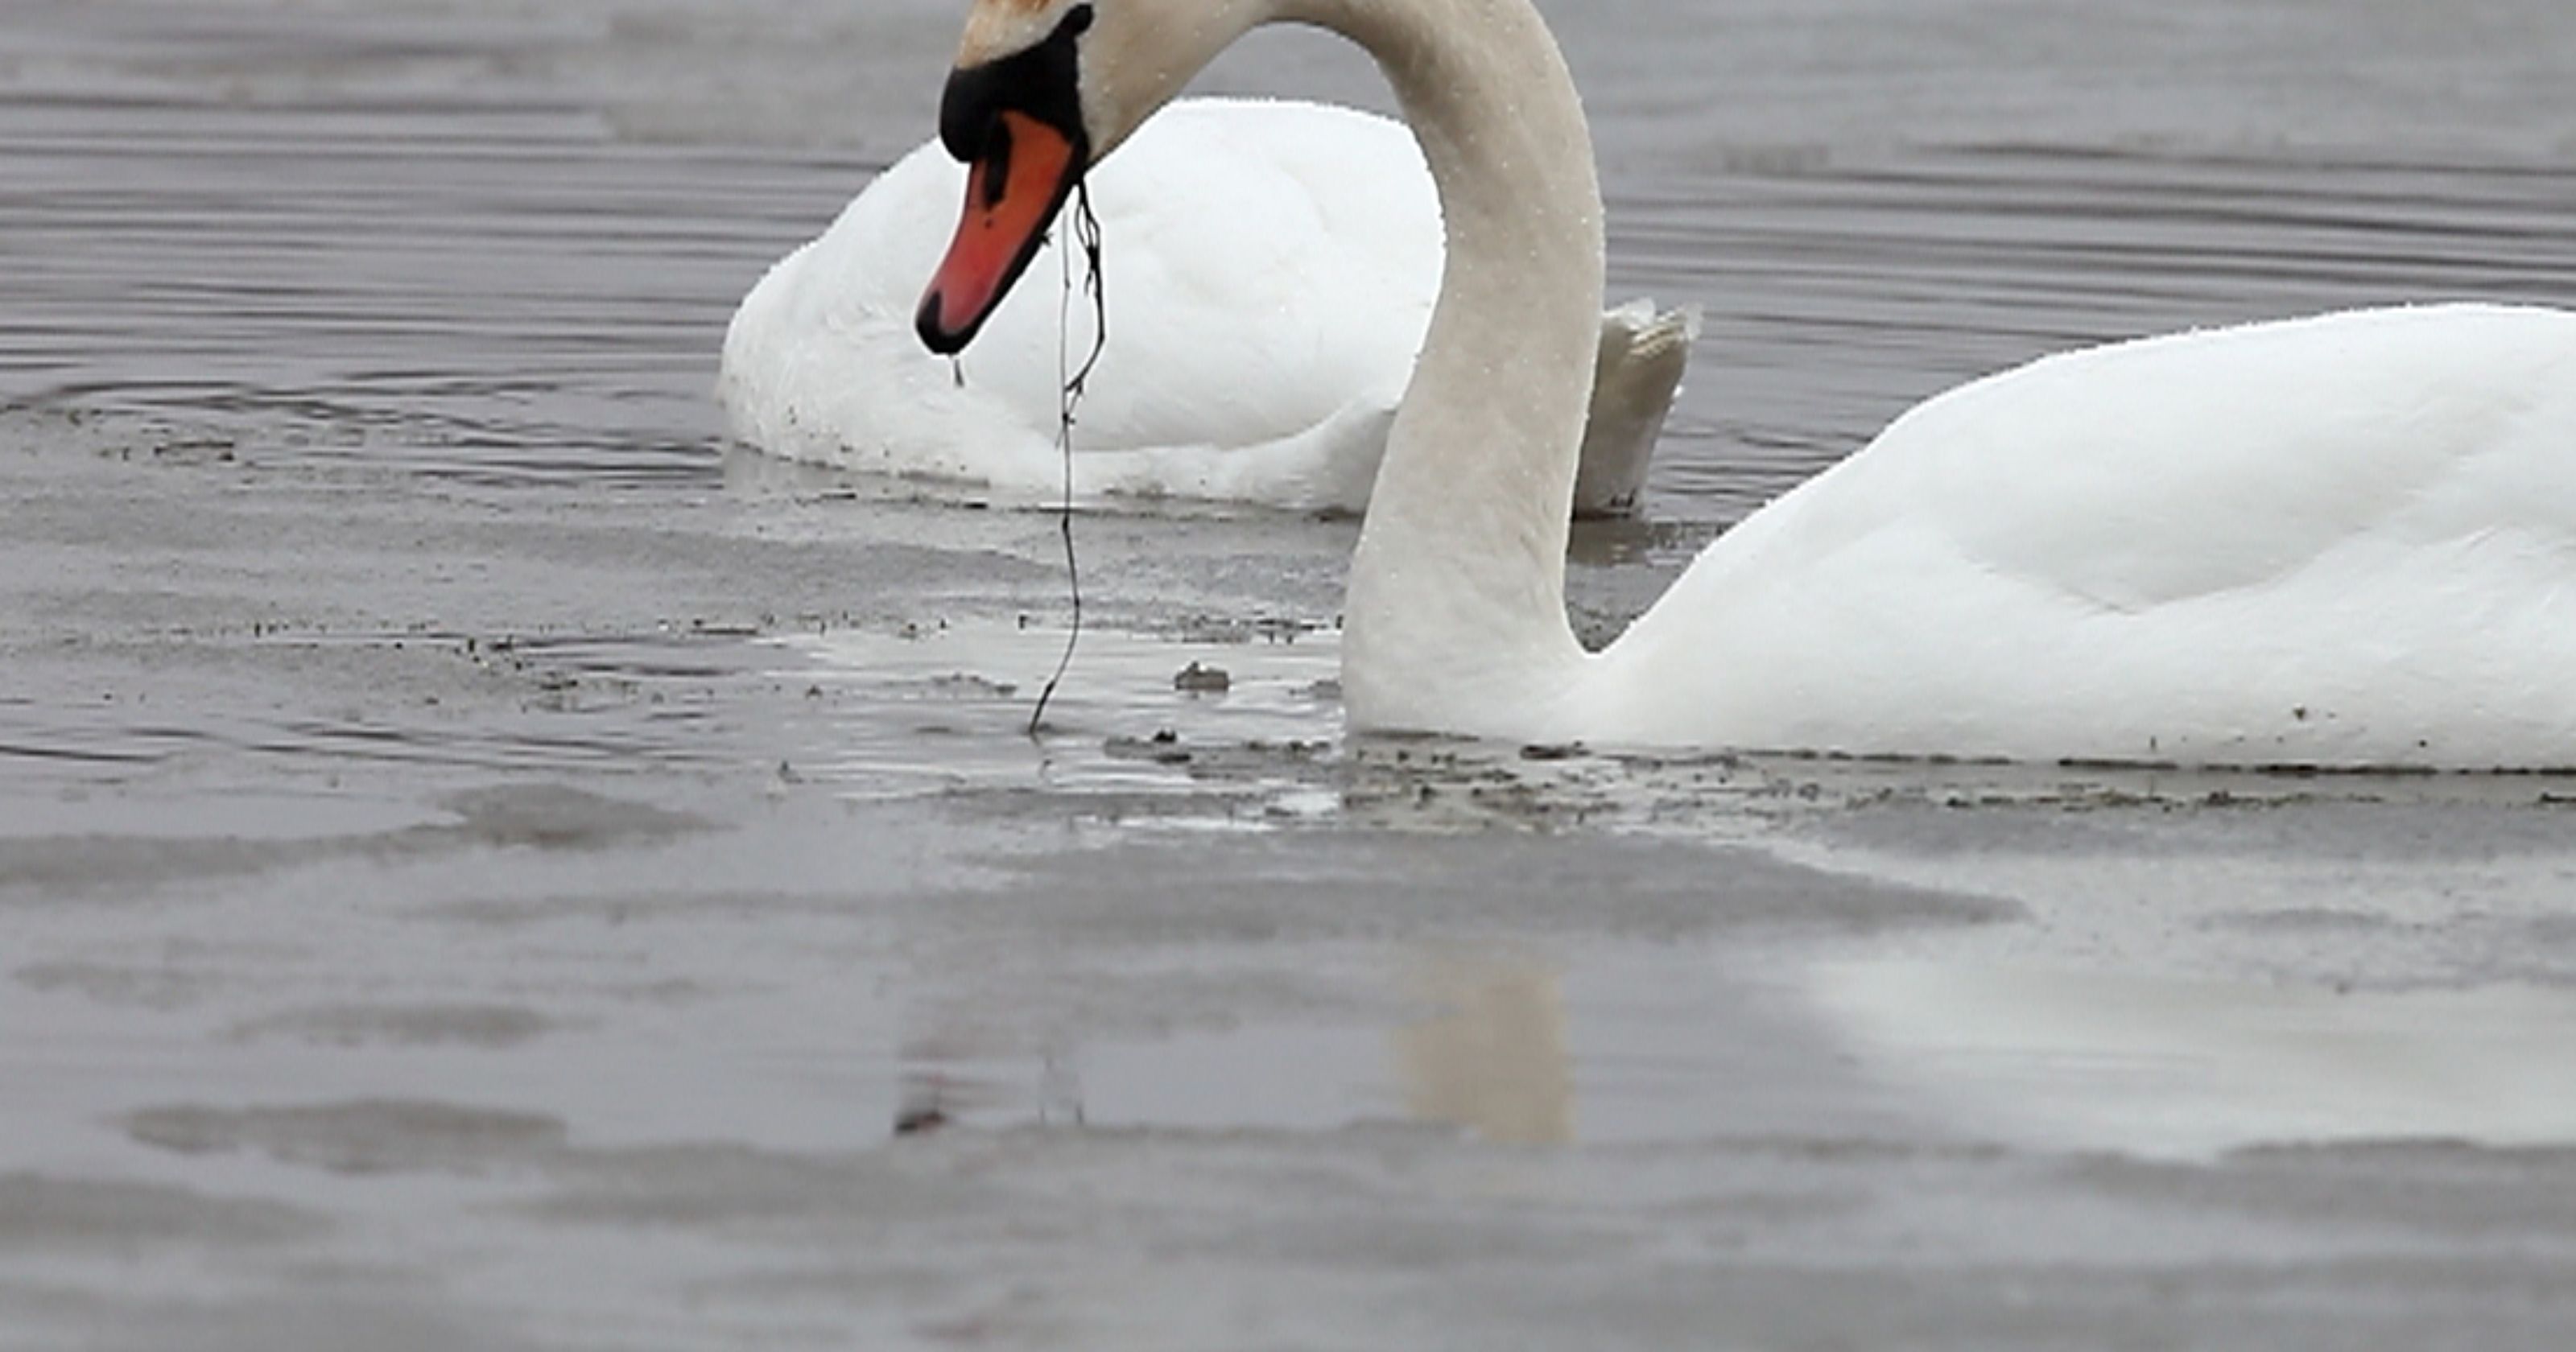 Swan song: N.Y. wants invasive waterfowl to take a bow